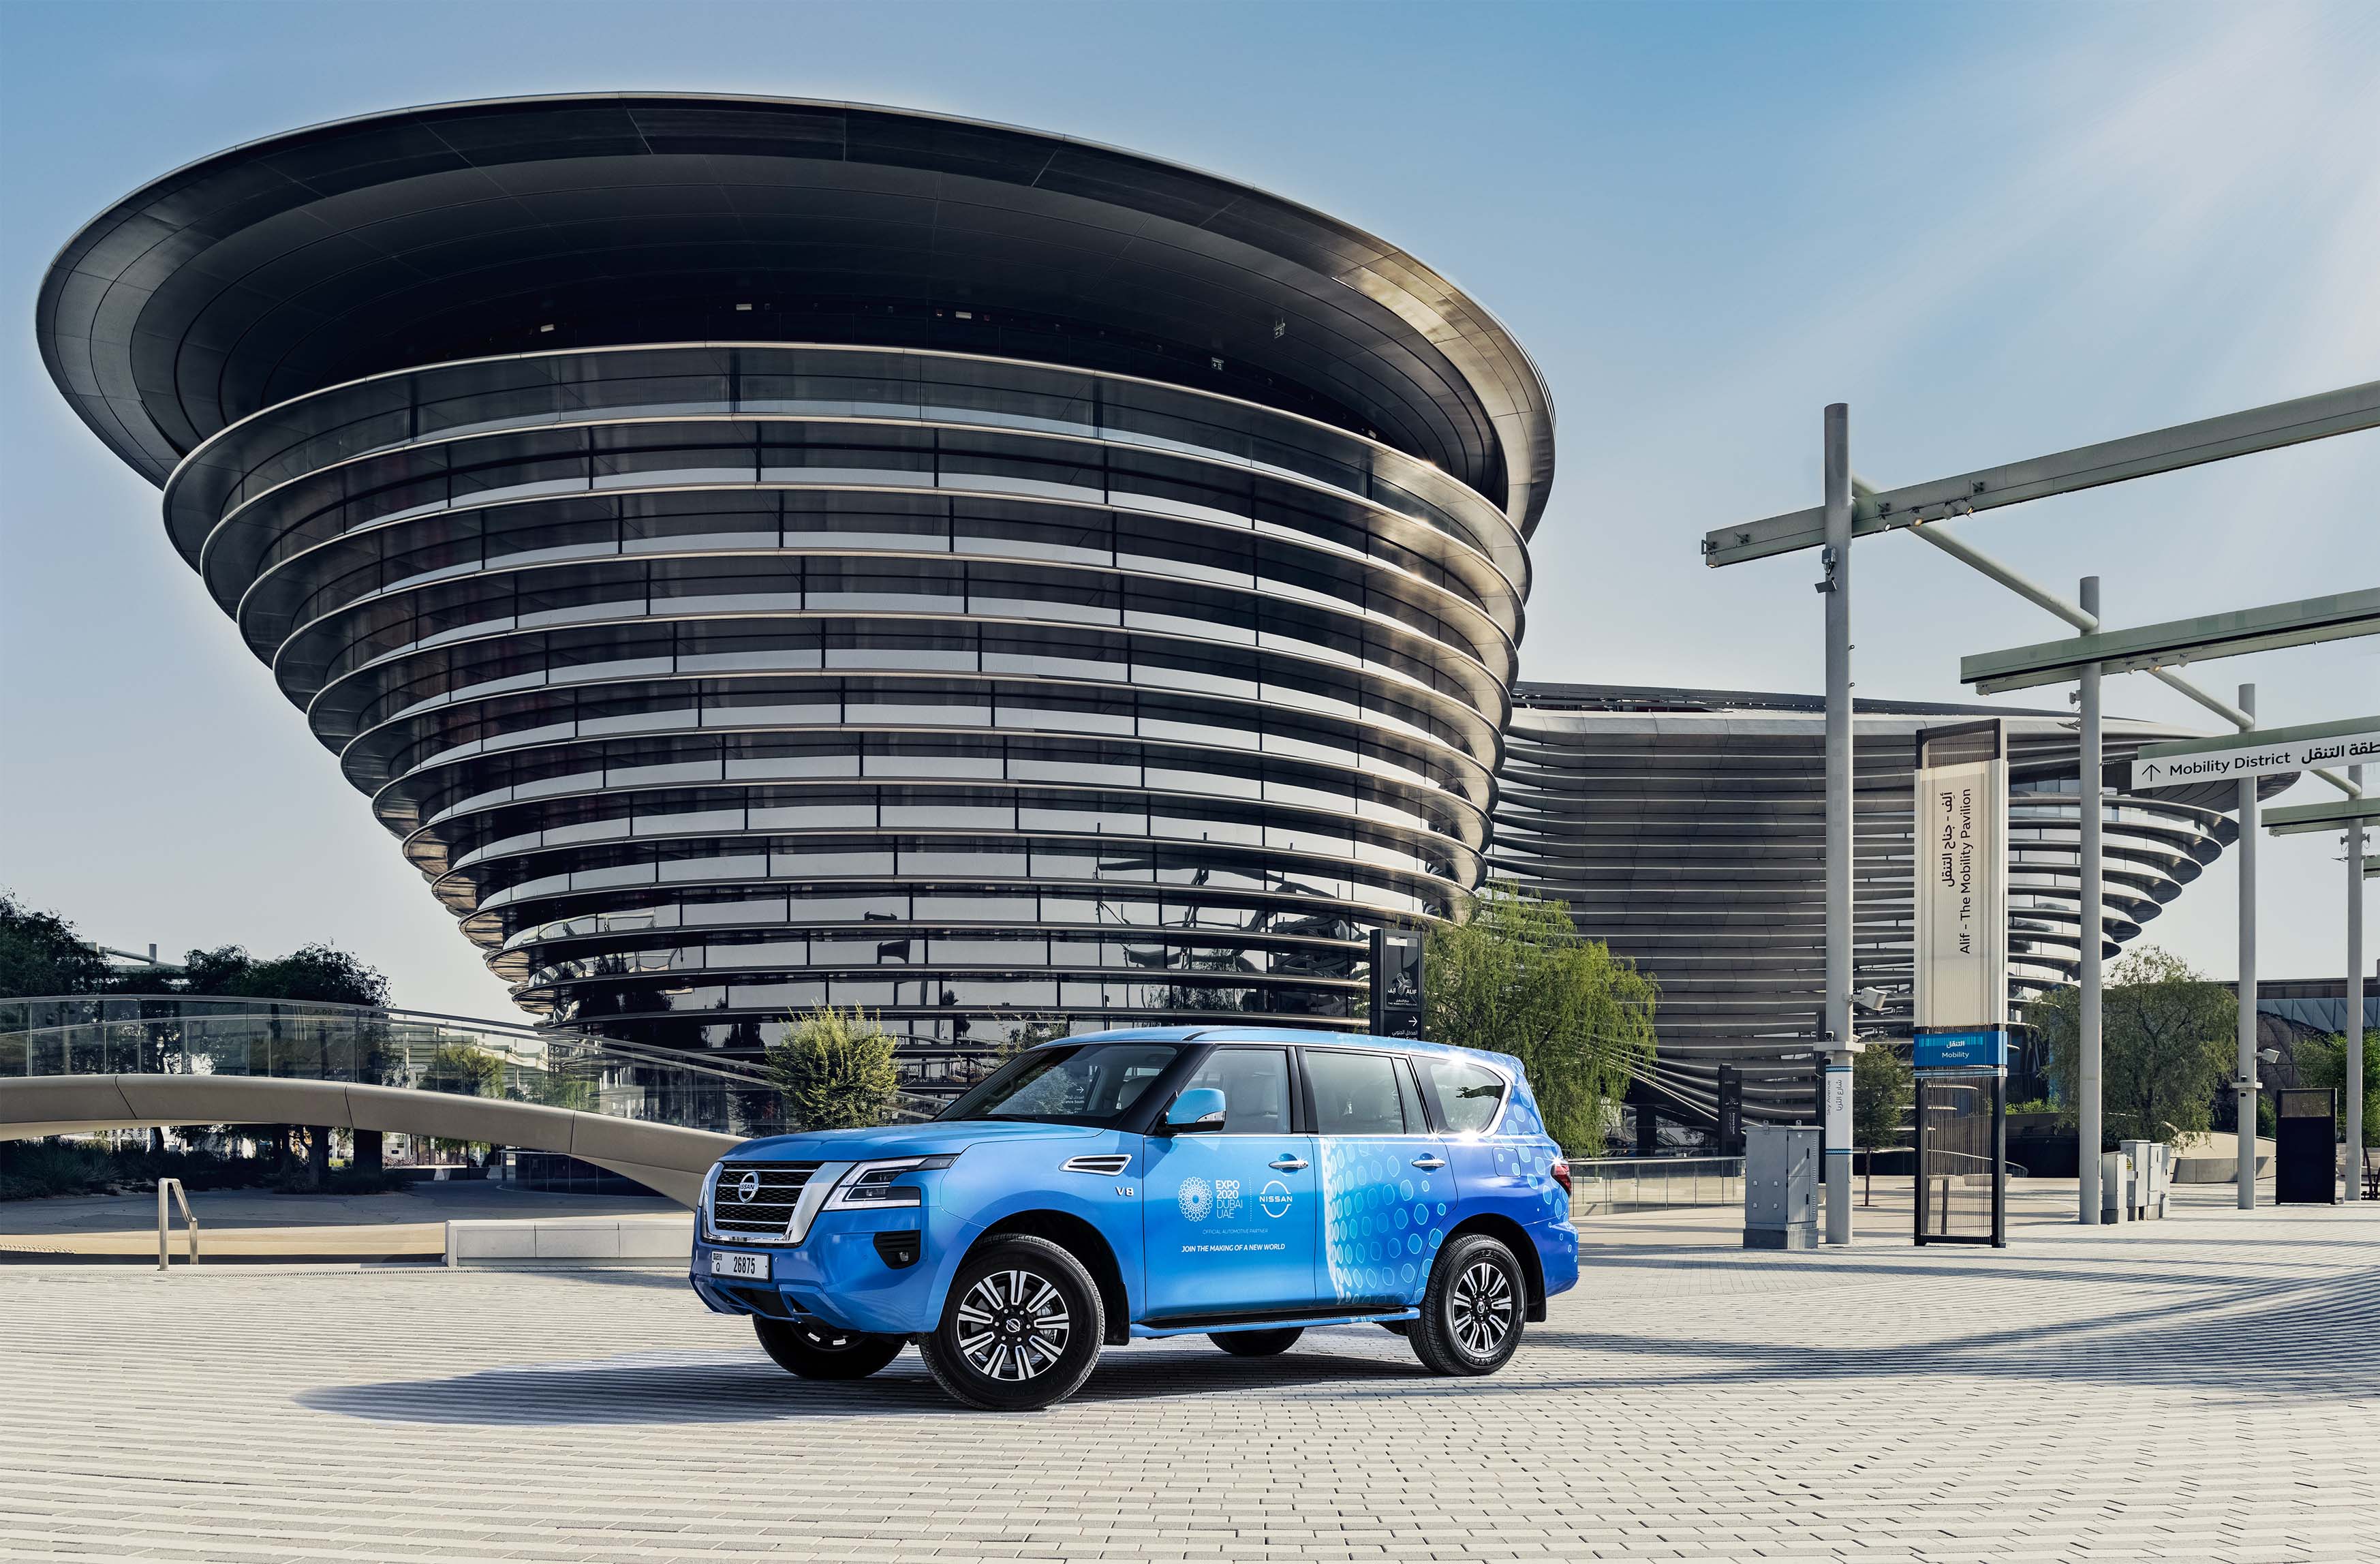 Nissan at the forefront as Expo 2020 Dubai opens its doors to the world